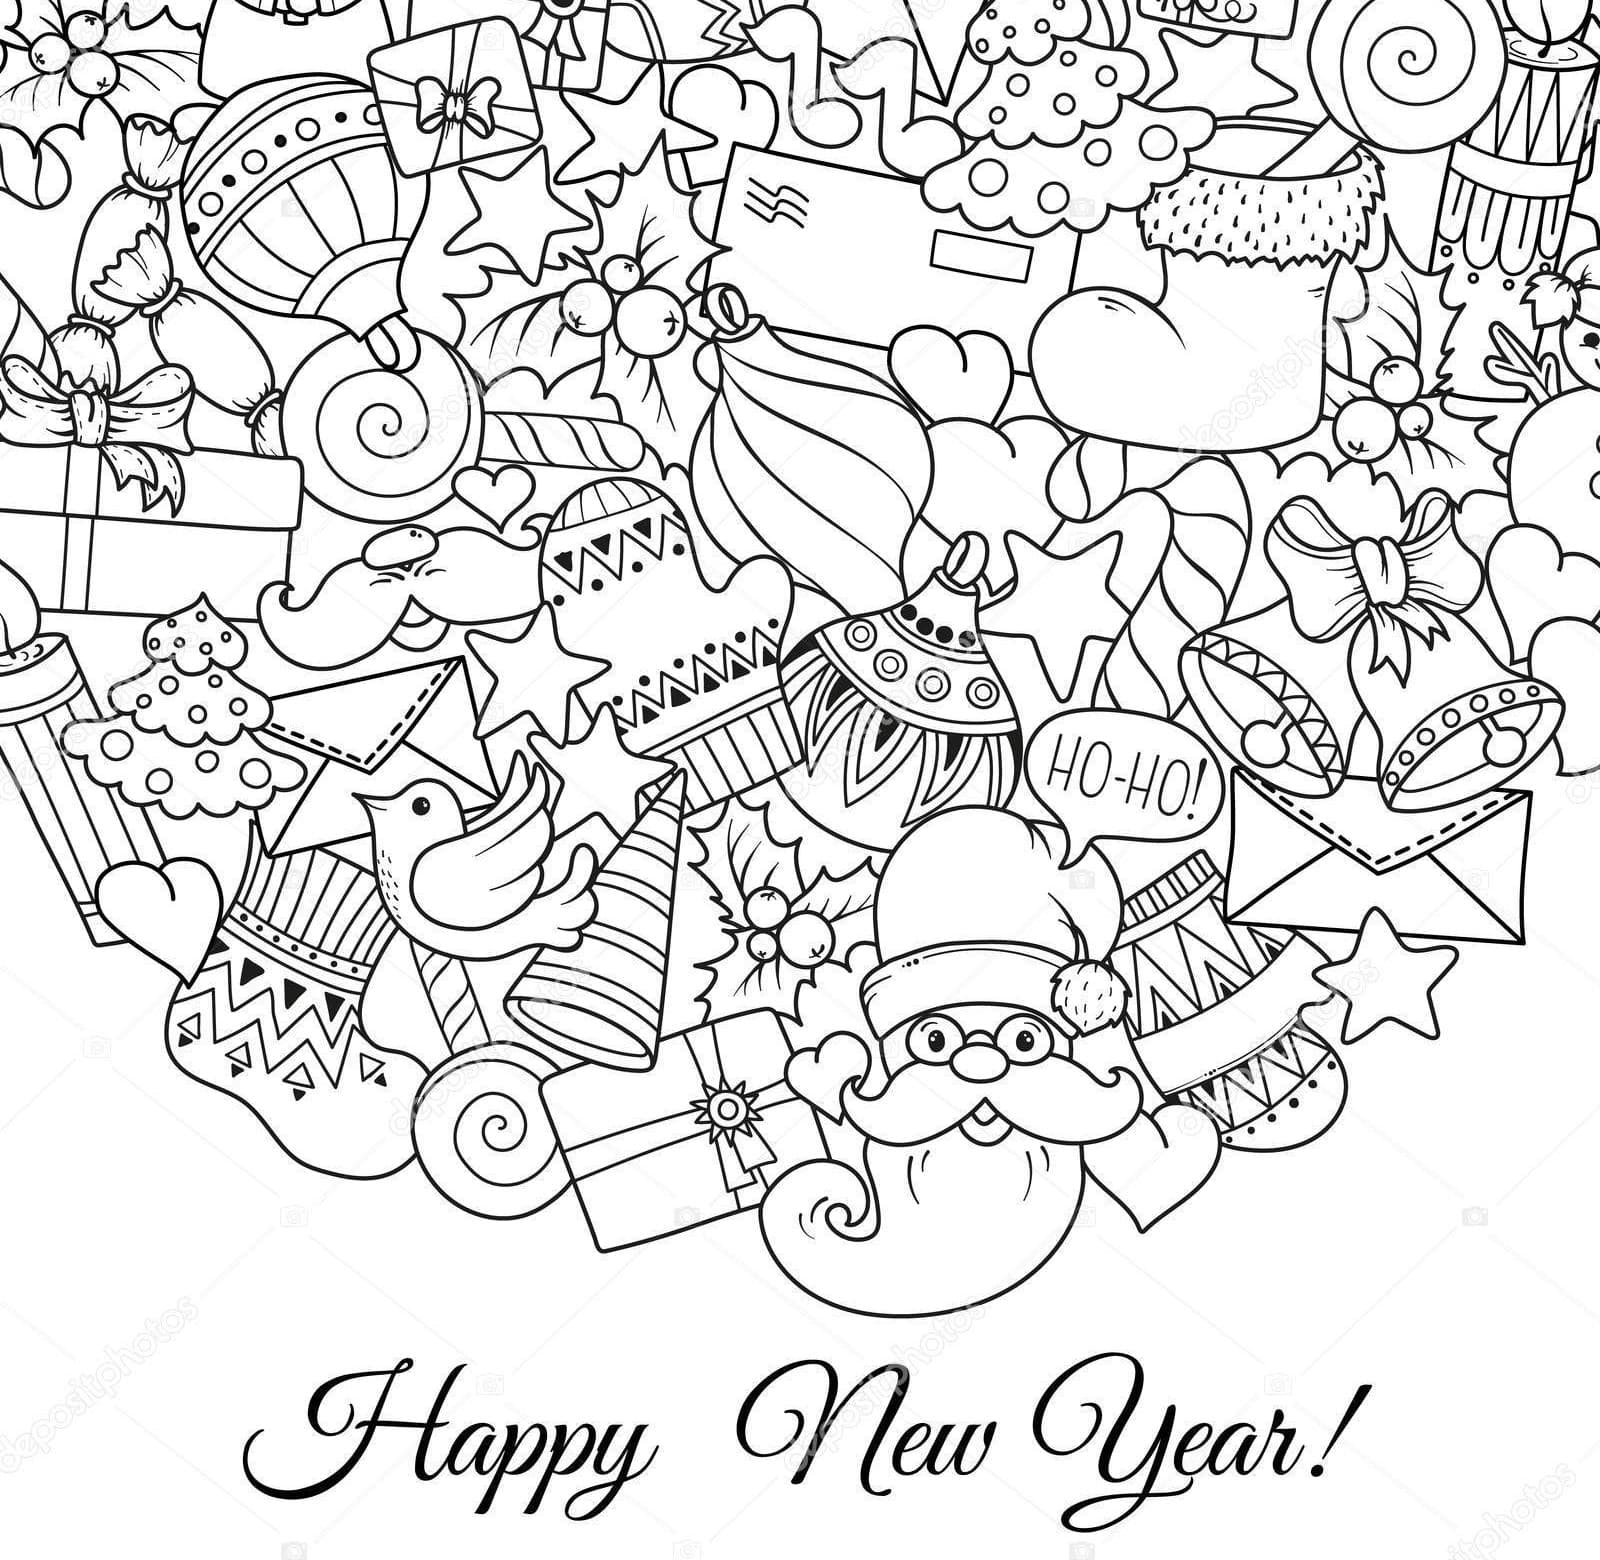 Chinese New Year 2020 Coloring Pages - Coloring Home